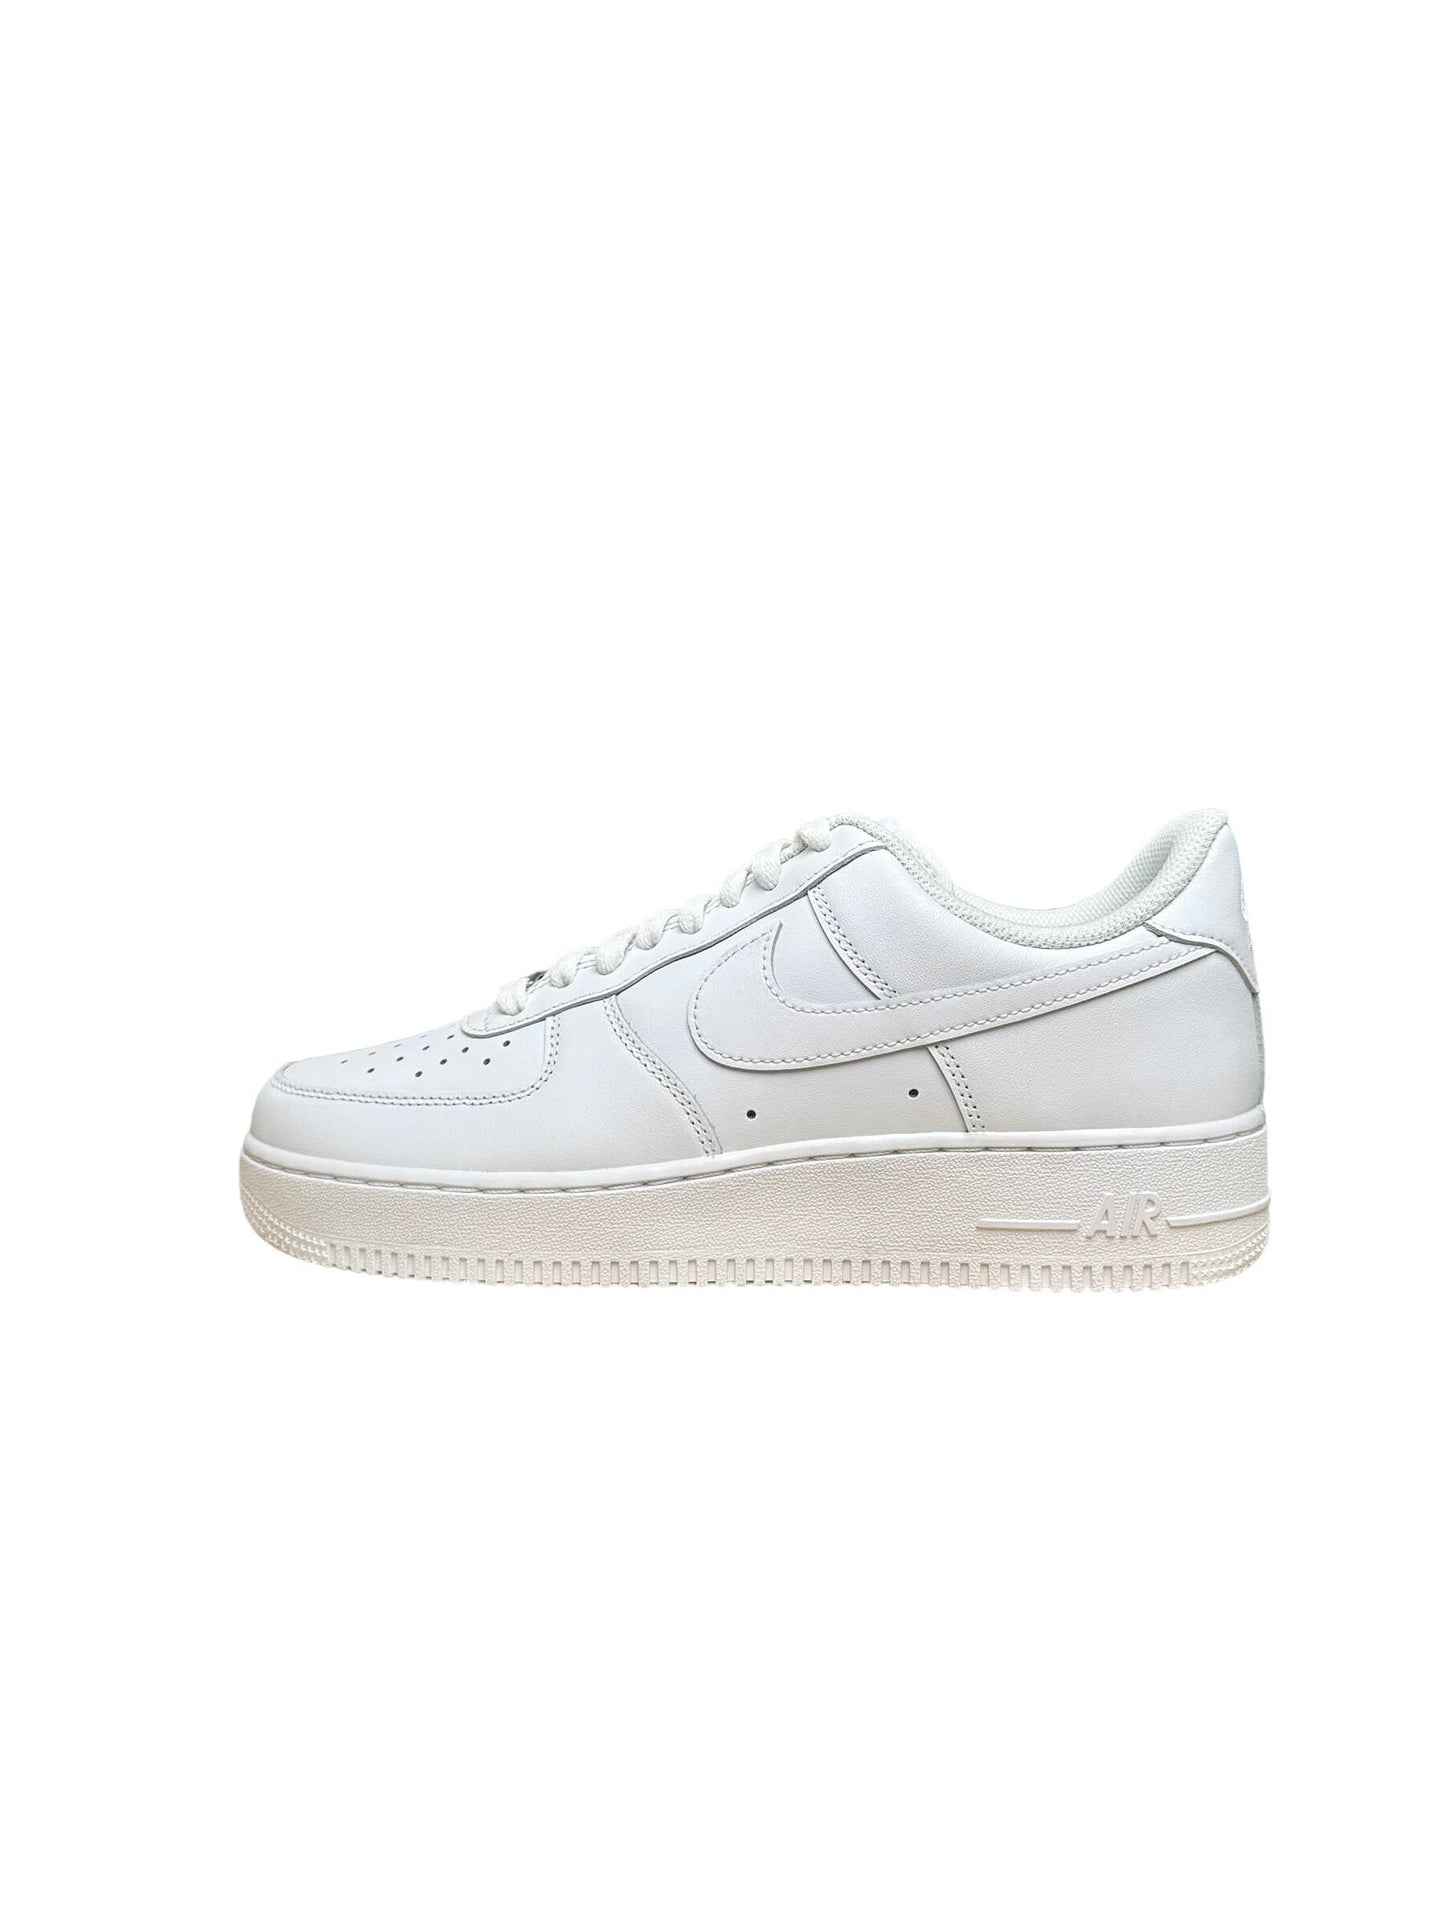 Nike Air Force 1 ’07 White Sneakers - Genuine Design Luxury Consignment for Men. New & Pre-Owned Clothing, Shoes, & Accessories. Calgary, Canada